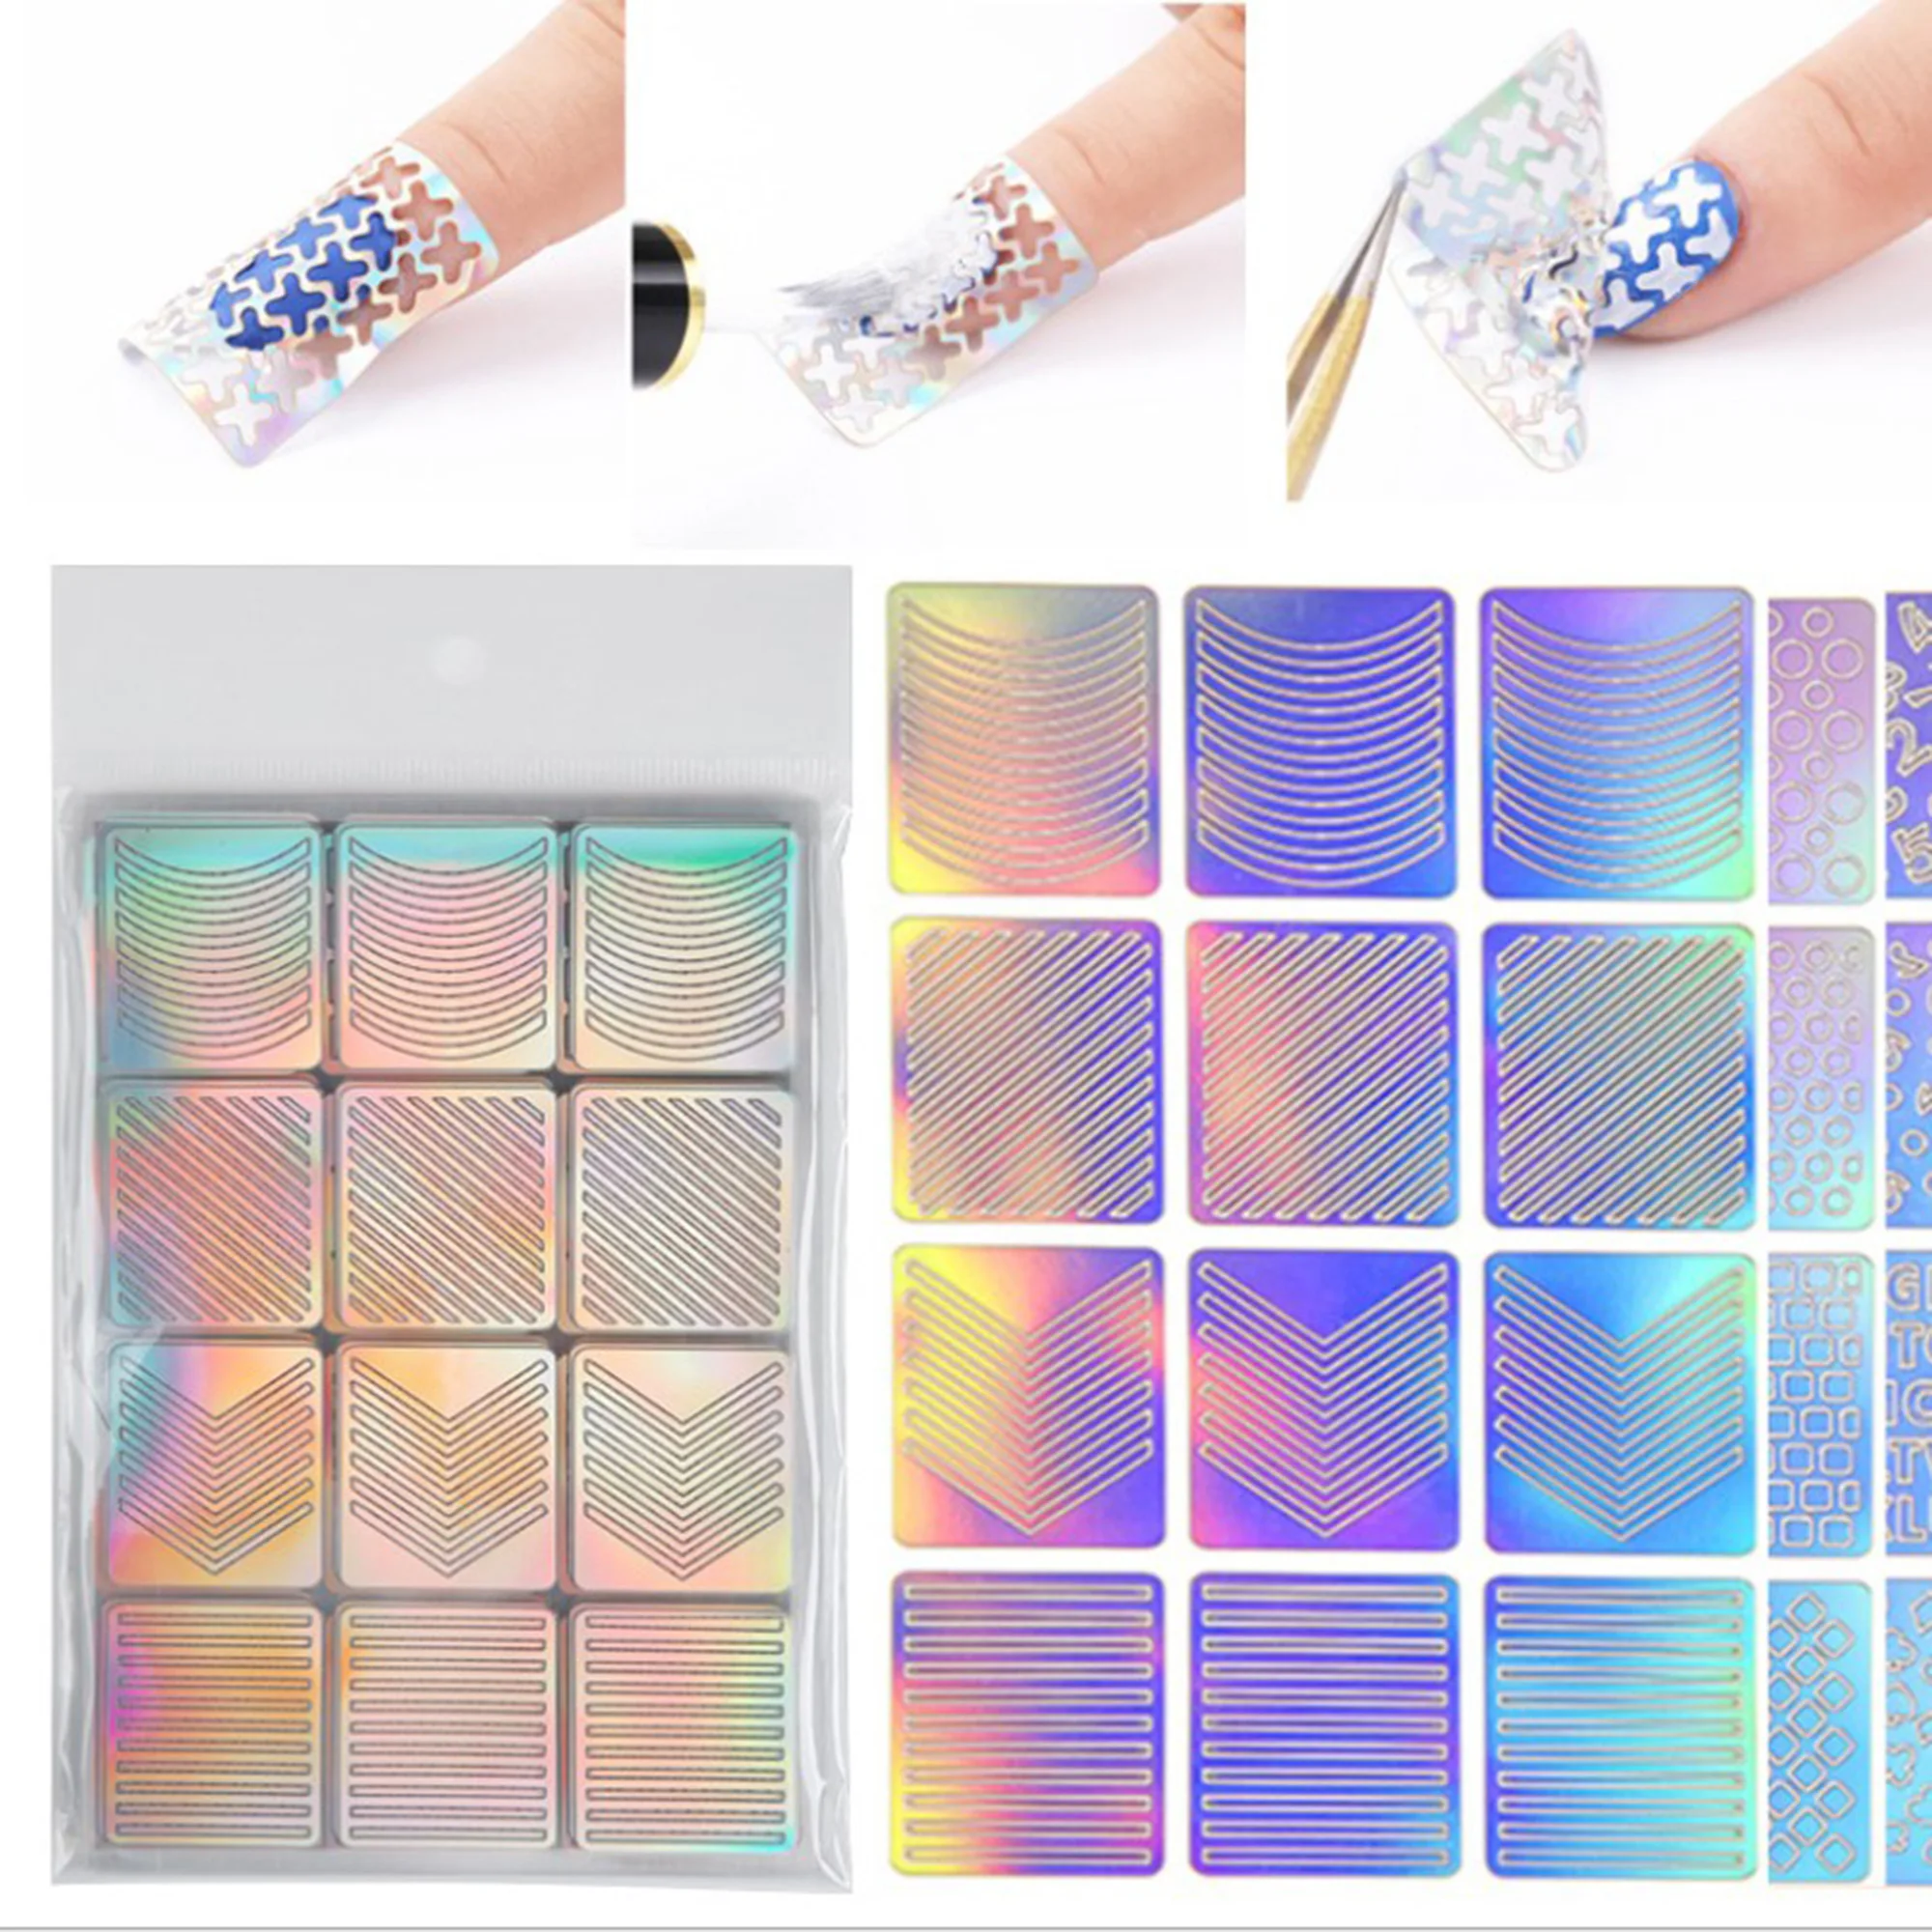 

3d Magic Laser Hollow Nail Art Sticker Nail Art Printing Template Large Painted Printing Template Sparkly Nail Art Decorations